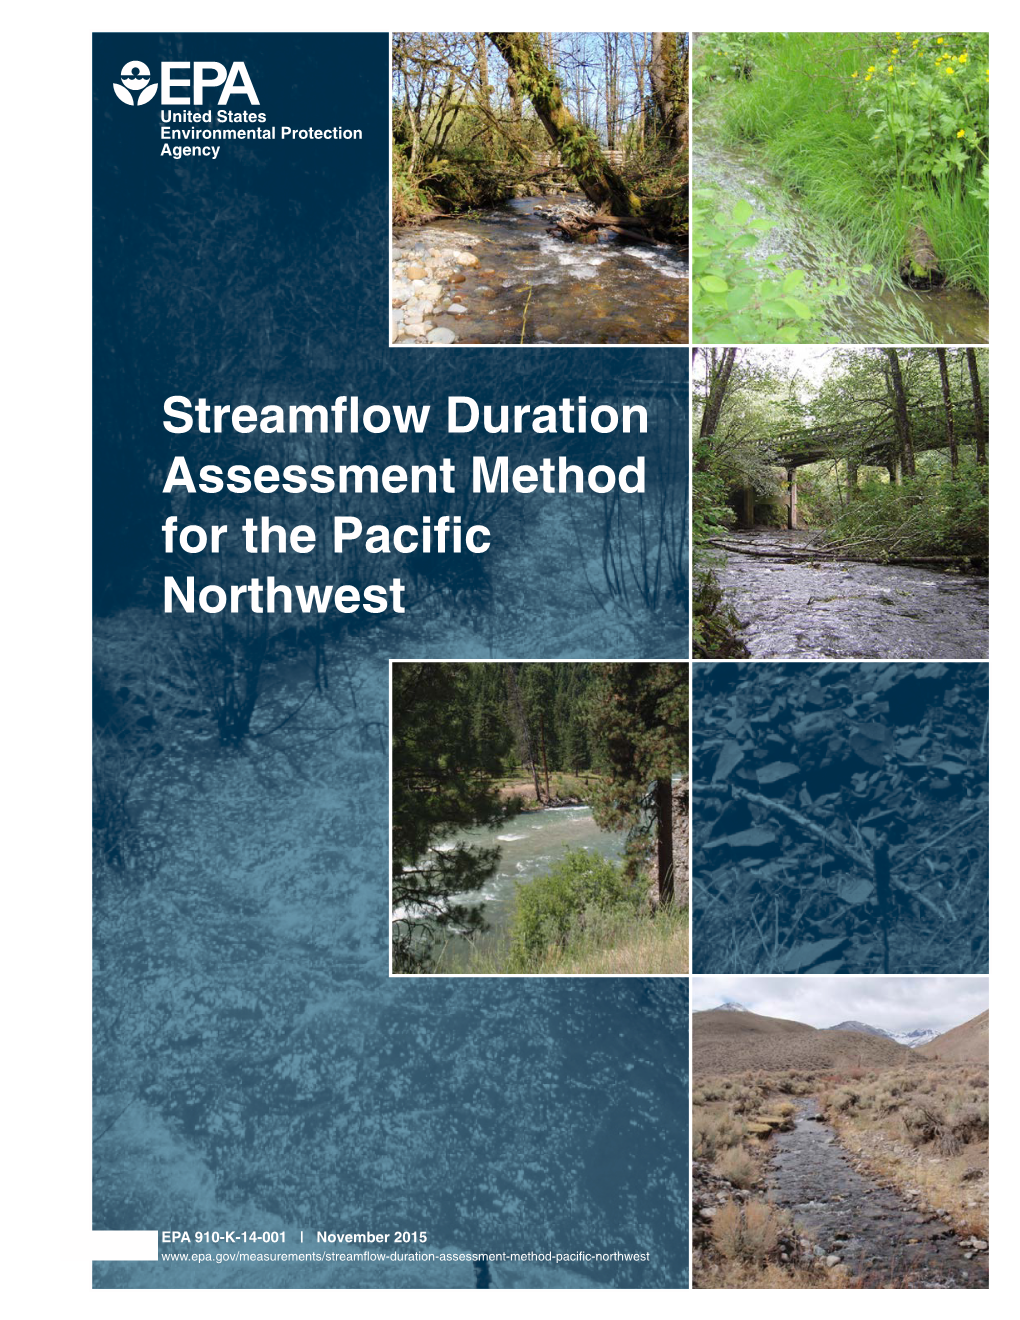 Streamflow Duration Assessment Method for the Pacific Northwest